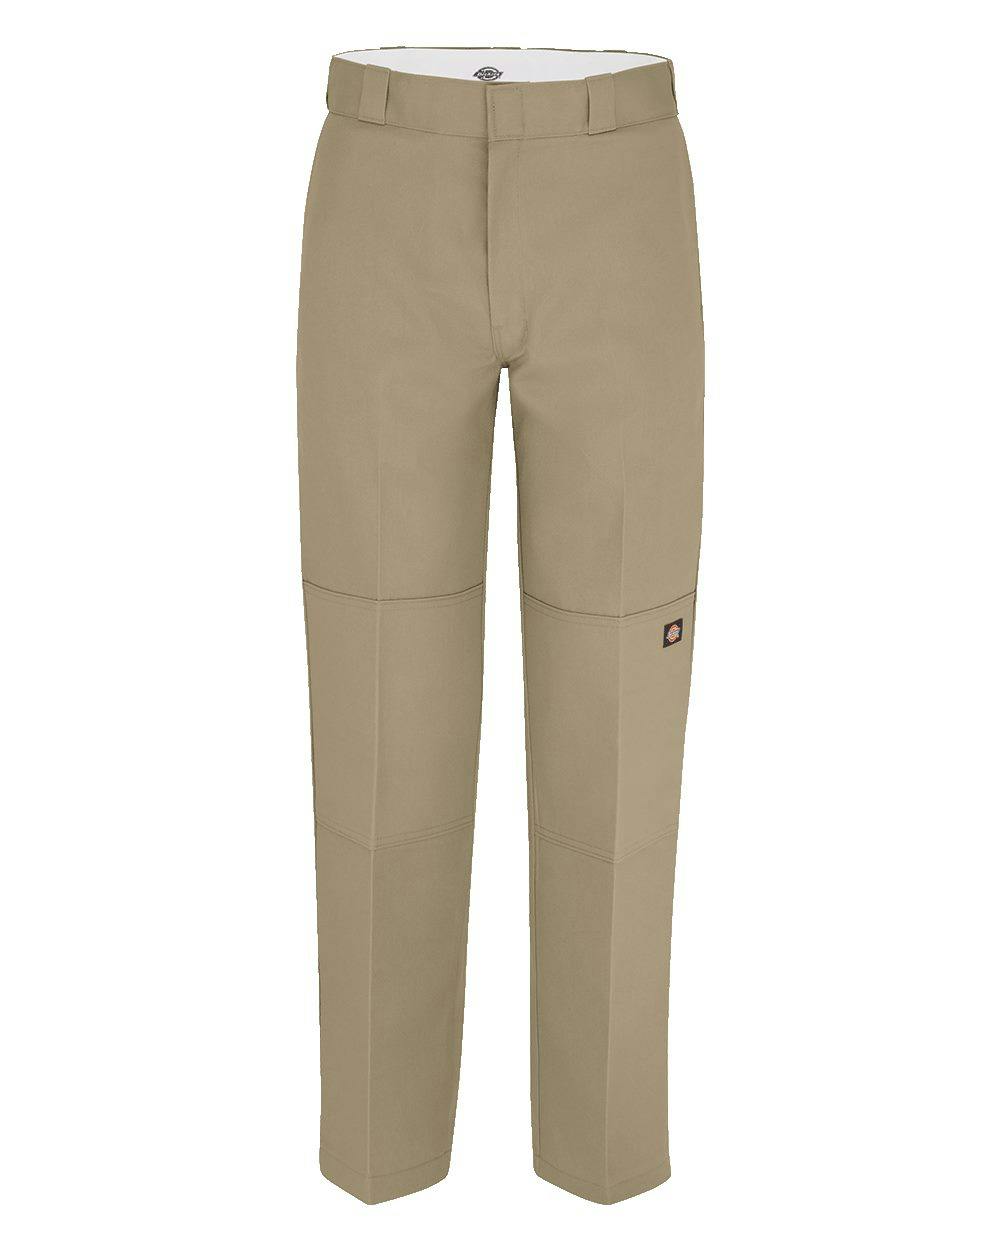 Image for Double Knee Work Pants - 8528